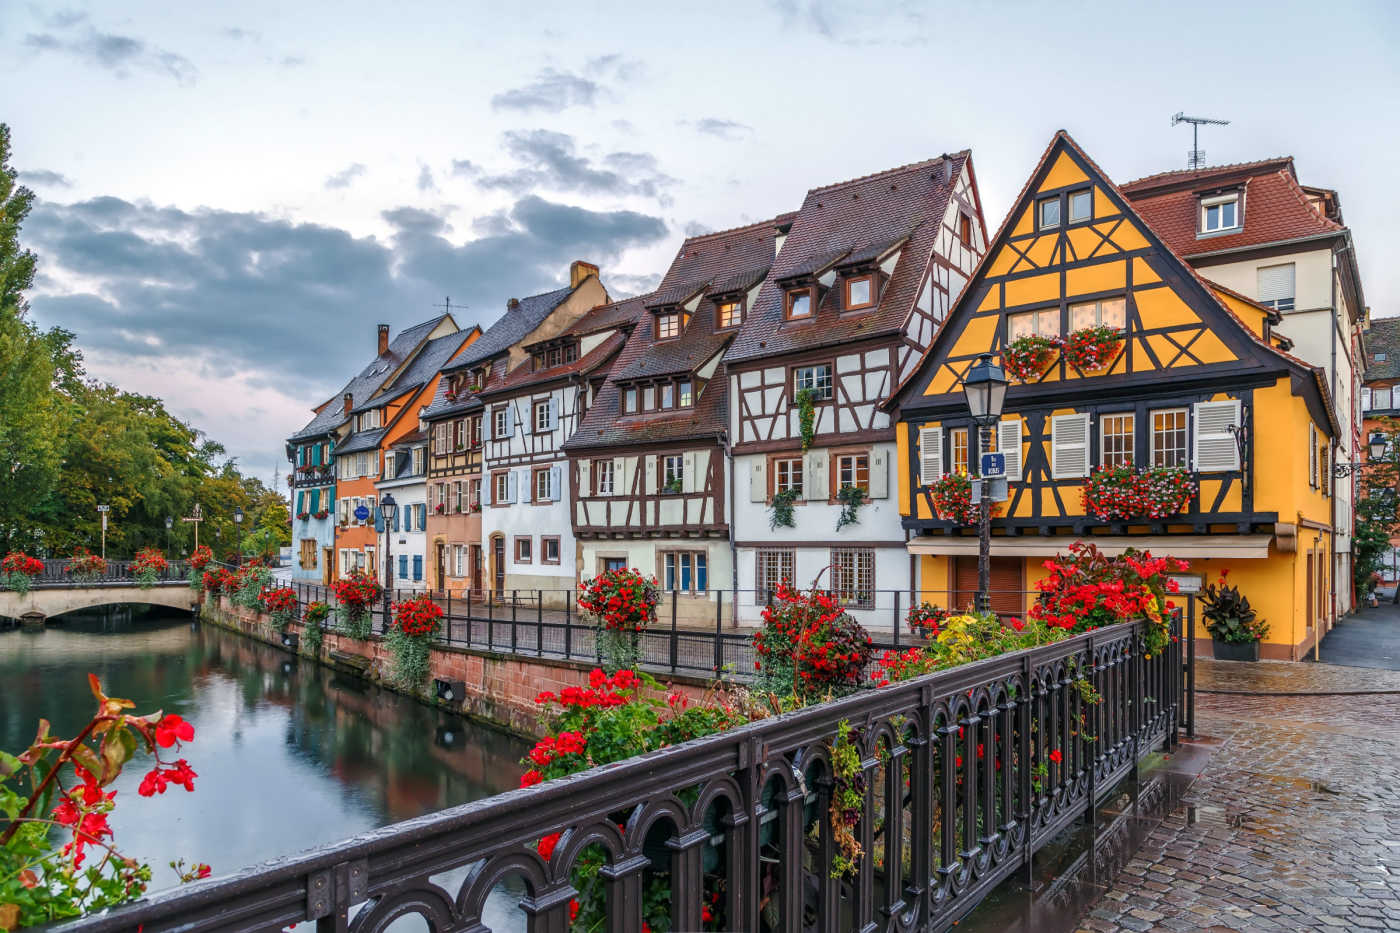 Europe's Cutest Storybook Villages | Travel to Quaint European Towns